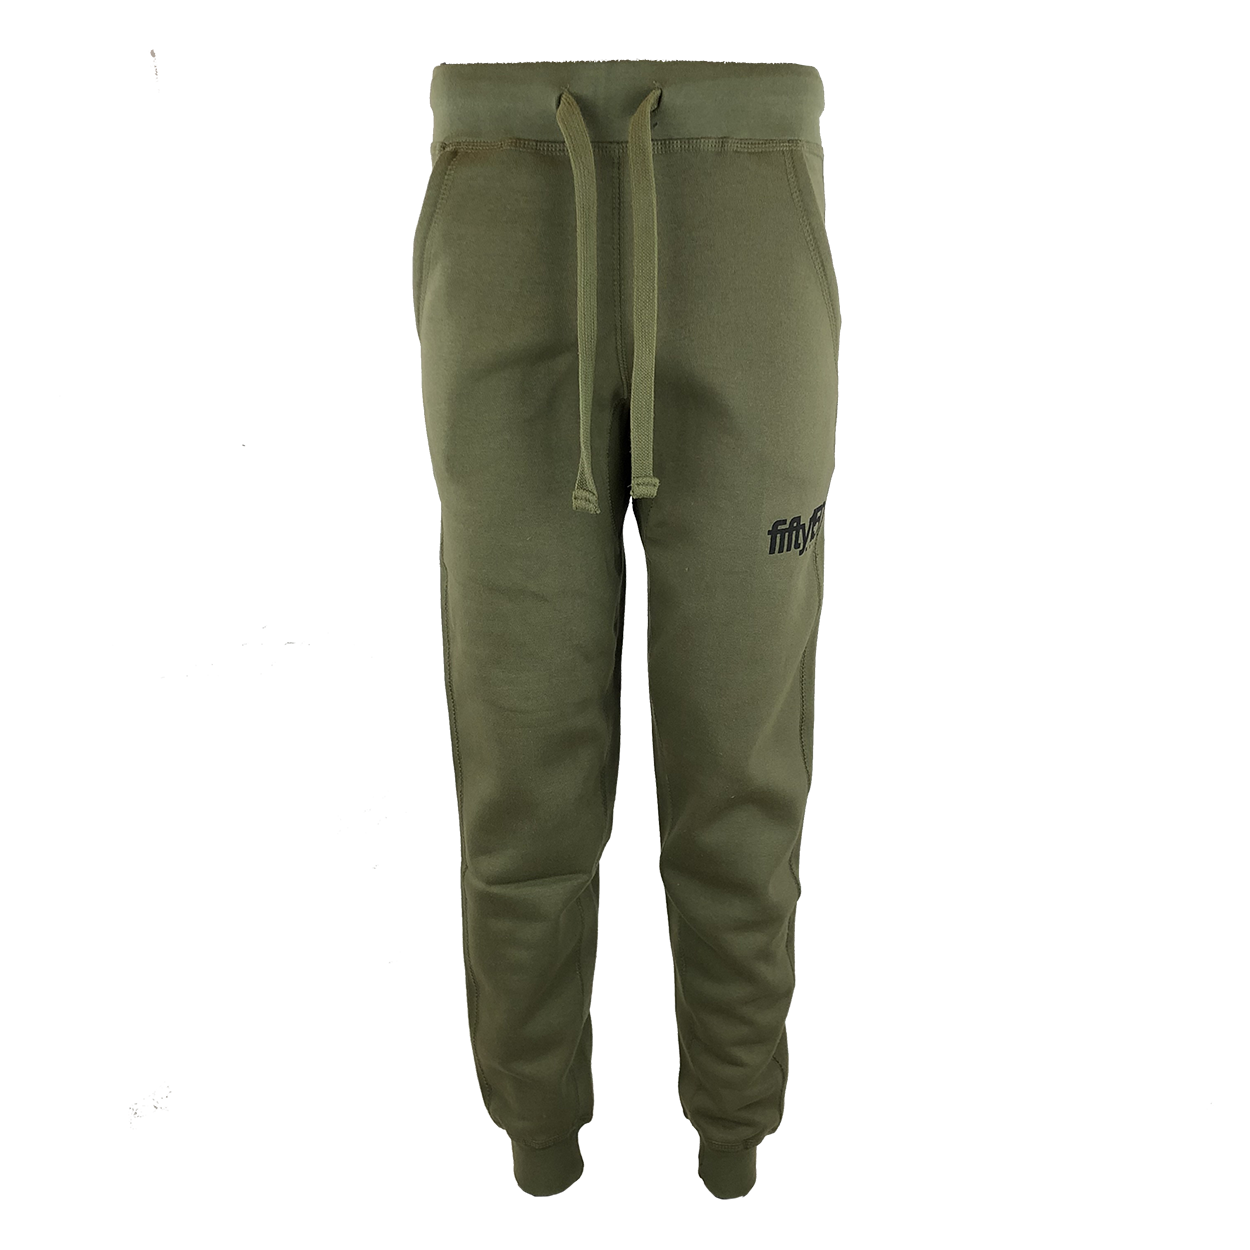 Army Green Sweat Pants | escapeauthority.com